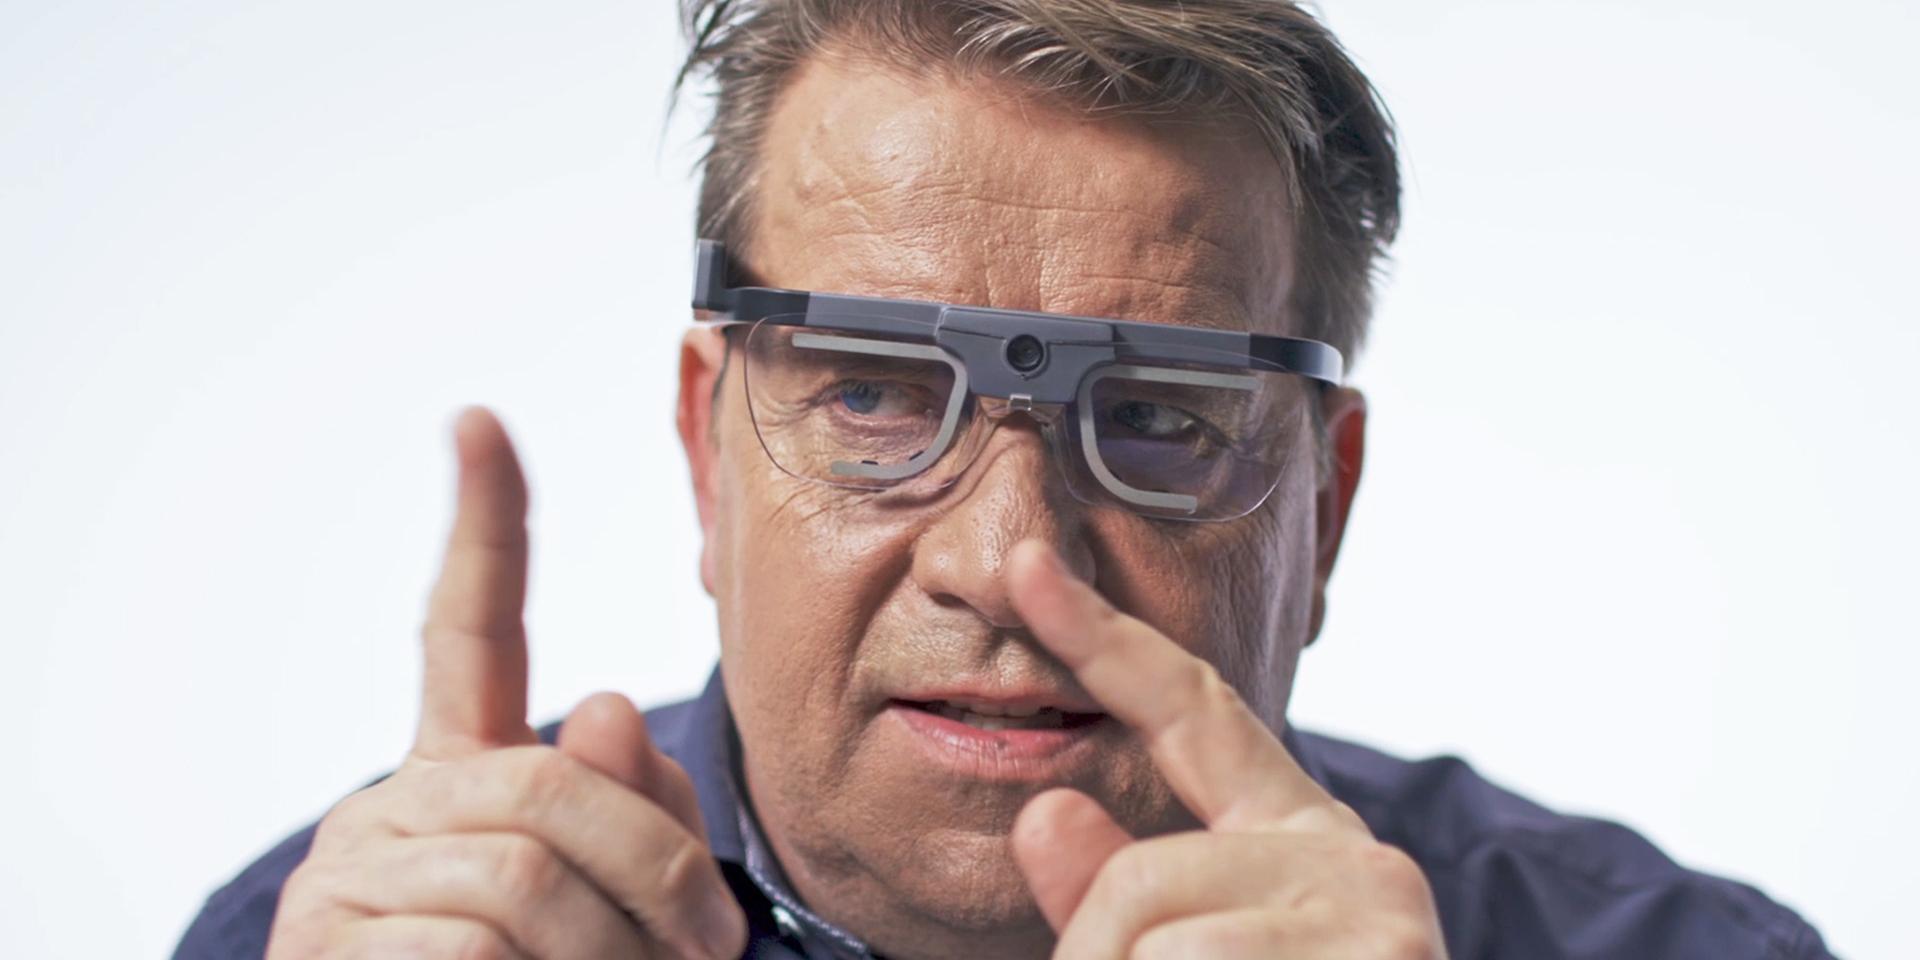 ZEISS expert Dr. Christian Lappe wears a so-called eye tracker, which records eye movements and gaze direction. Such mobile eye trackers are used for objective data collection.